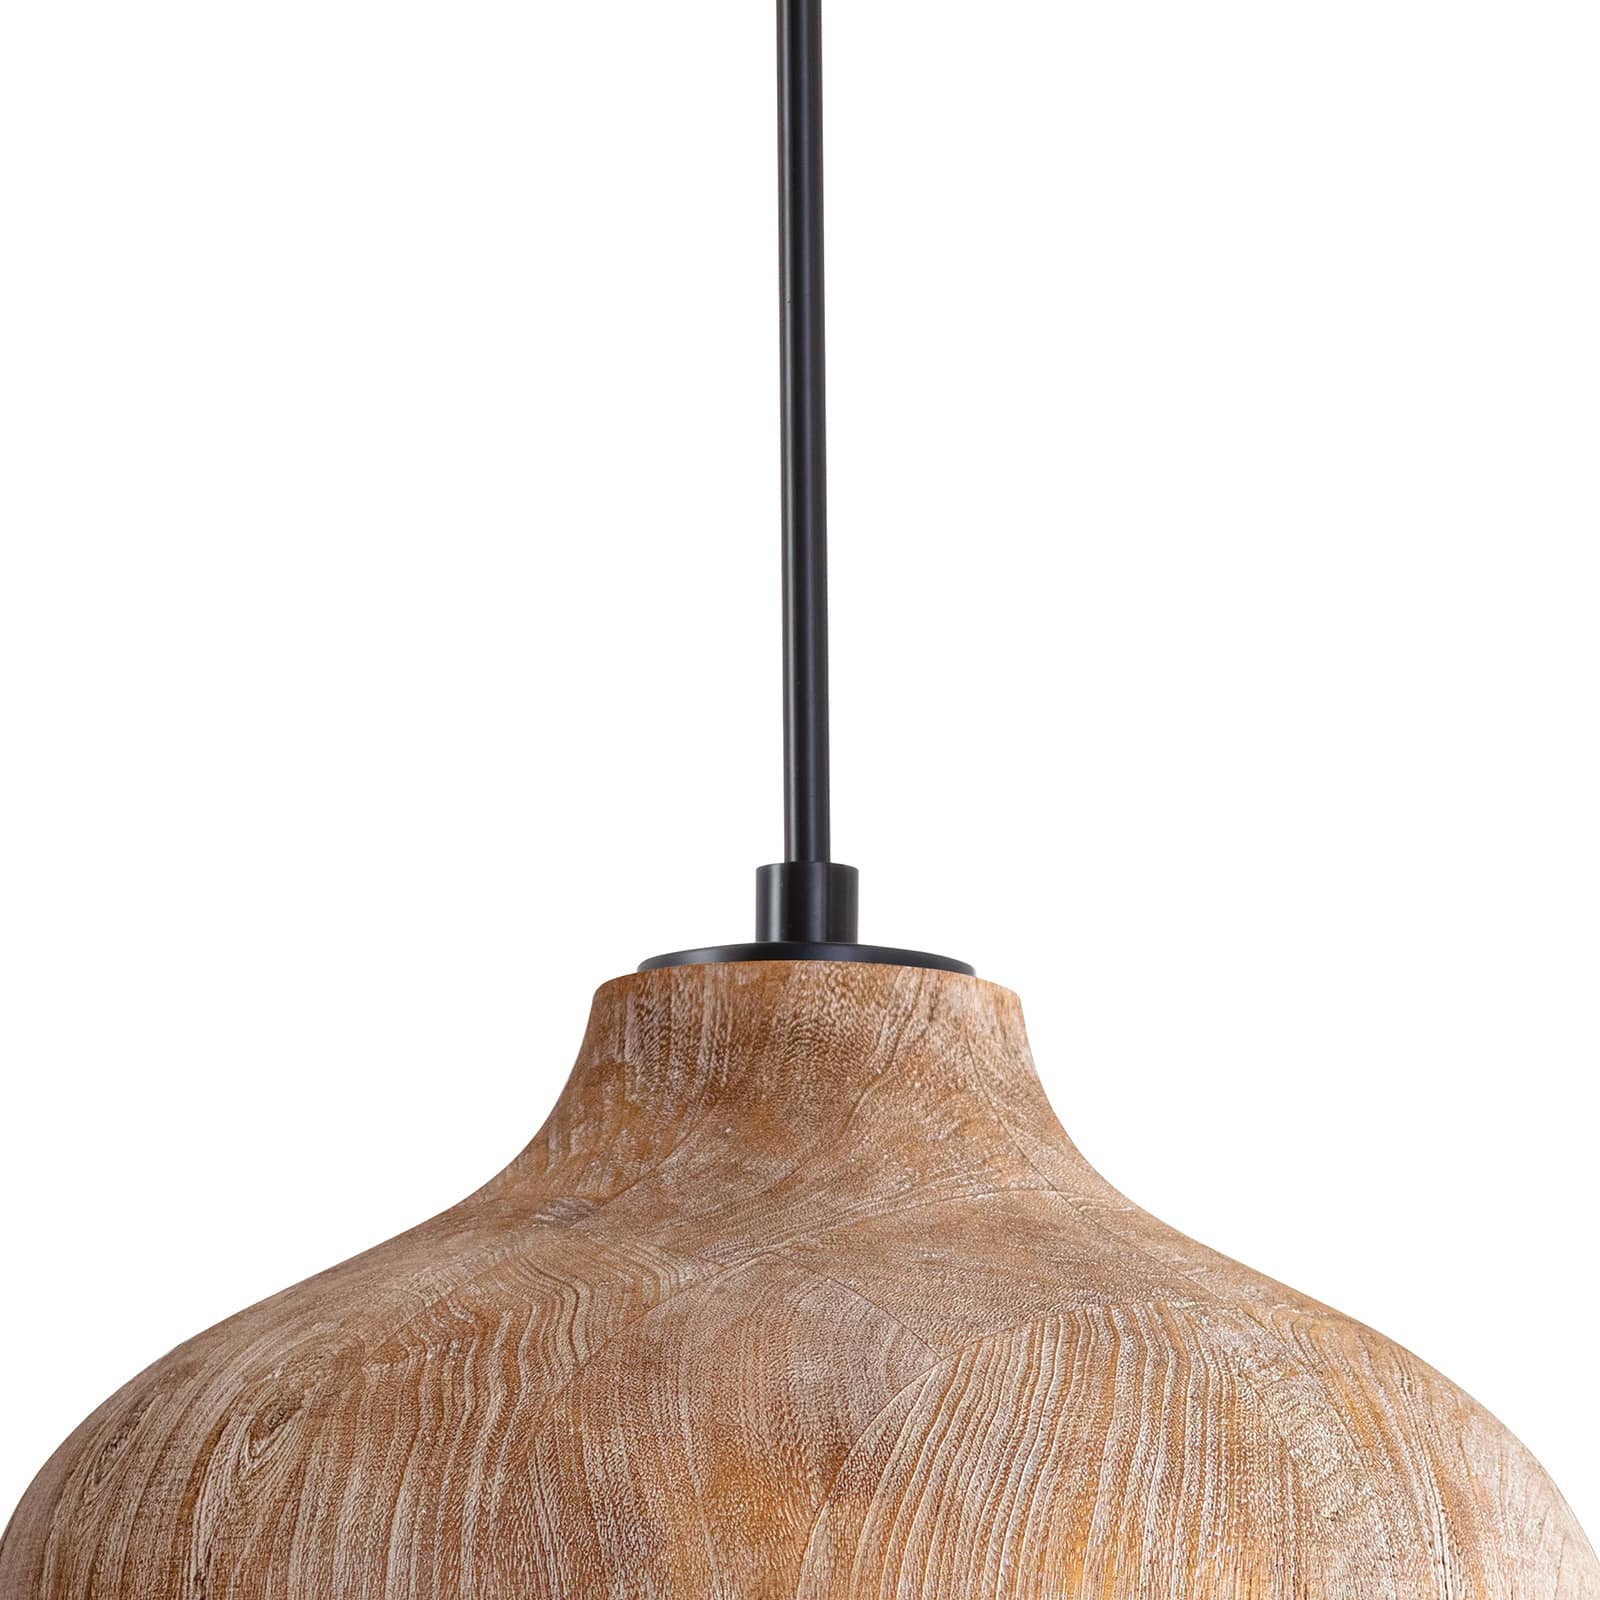 This Surfside Wood Pendant has a peaceful, organic feel with the white-washed, limed oak finish that brings a grain texture to the shade. We'd love to see this placed over a kitchen sink, island, or other area needing extra space.   Overall Dimensions: 15"w x 15"d x 18.5"h